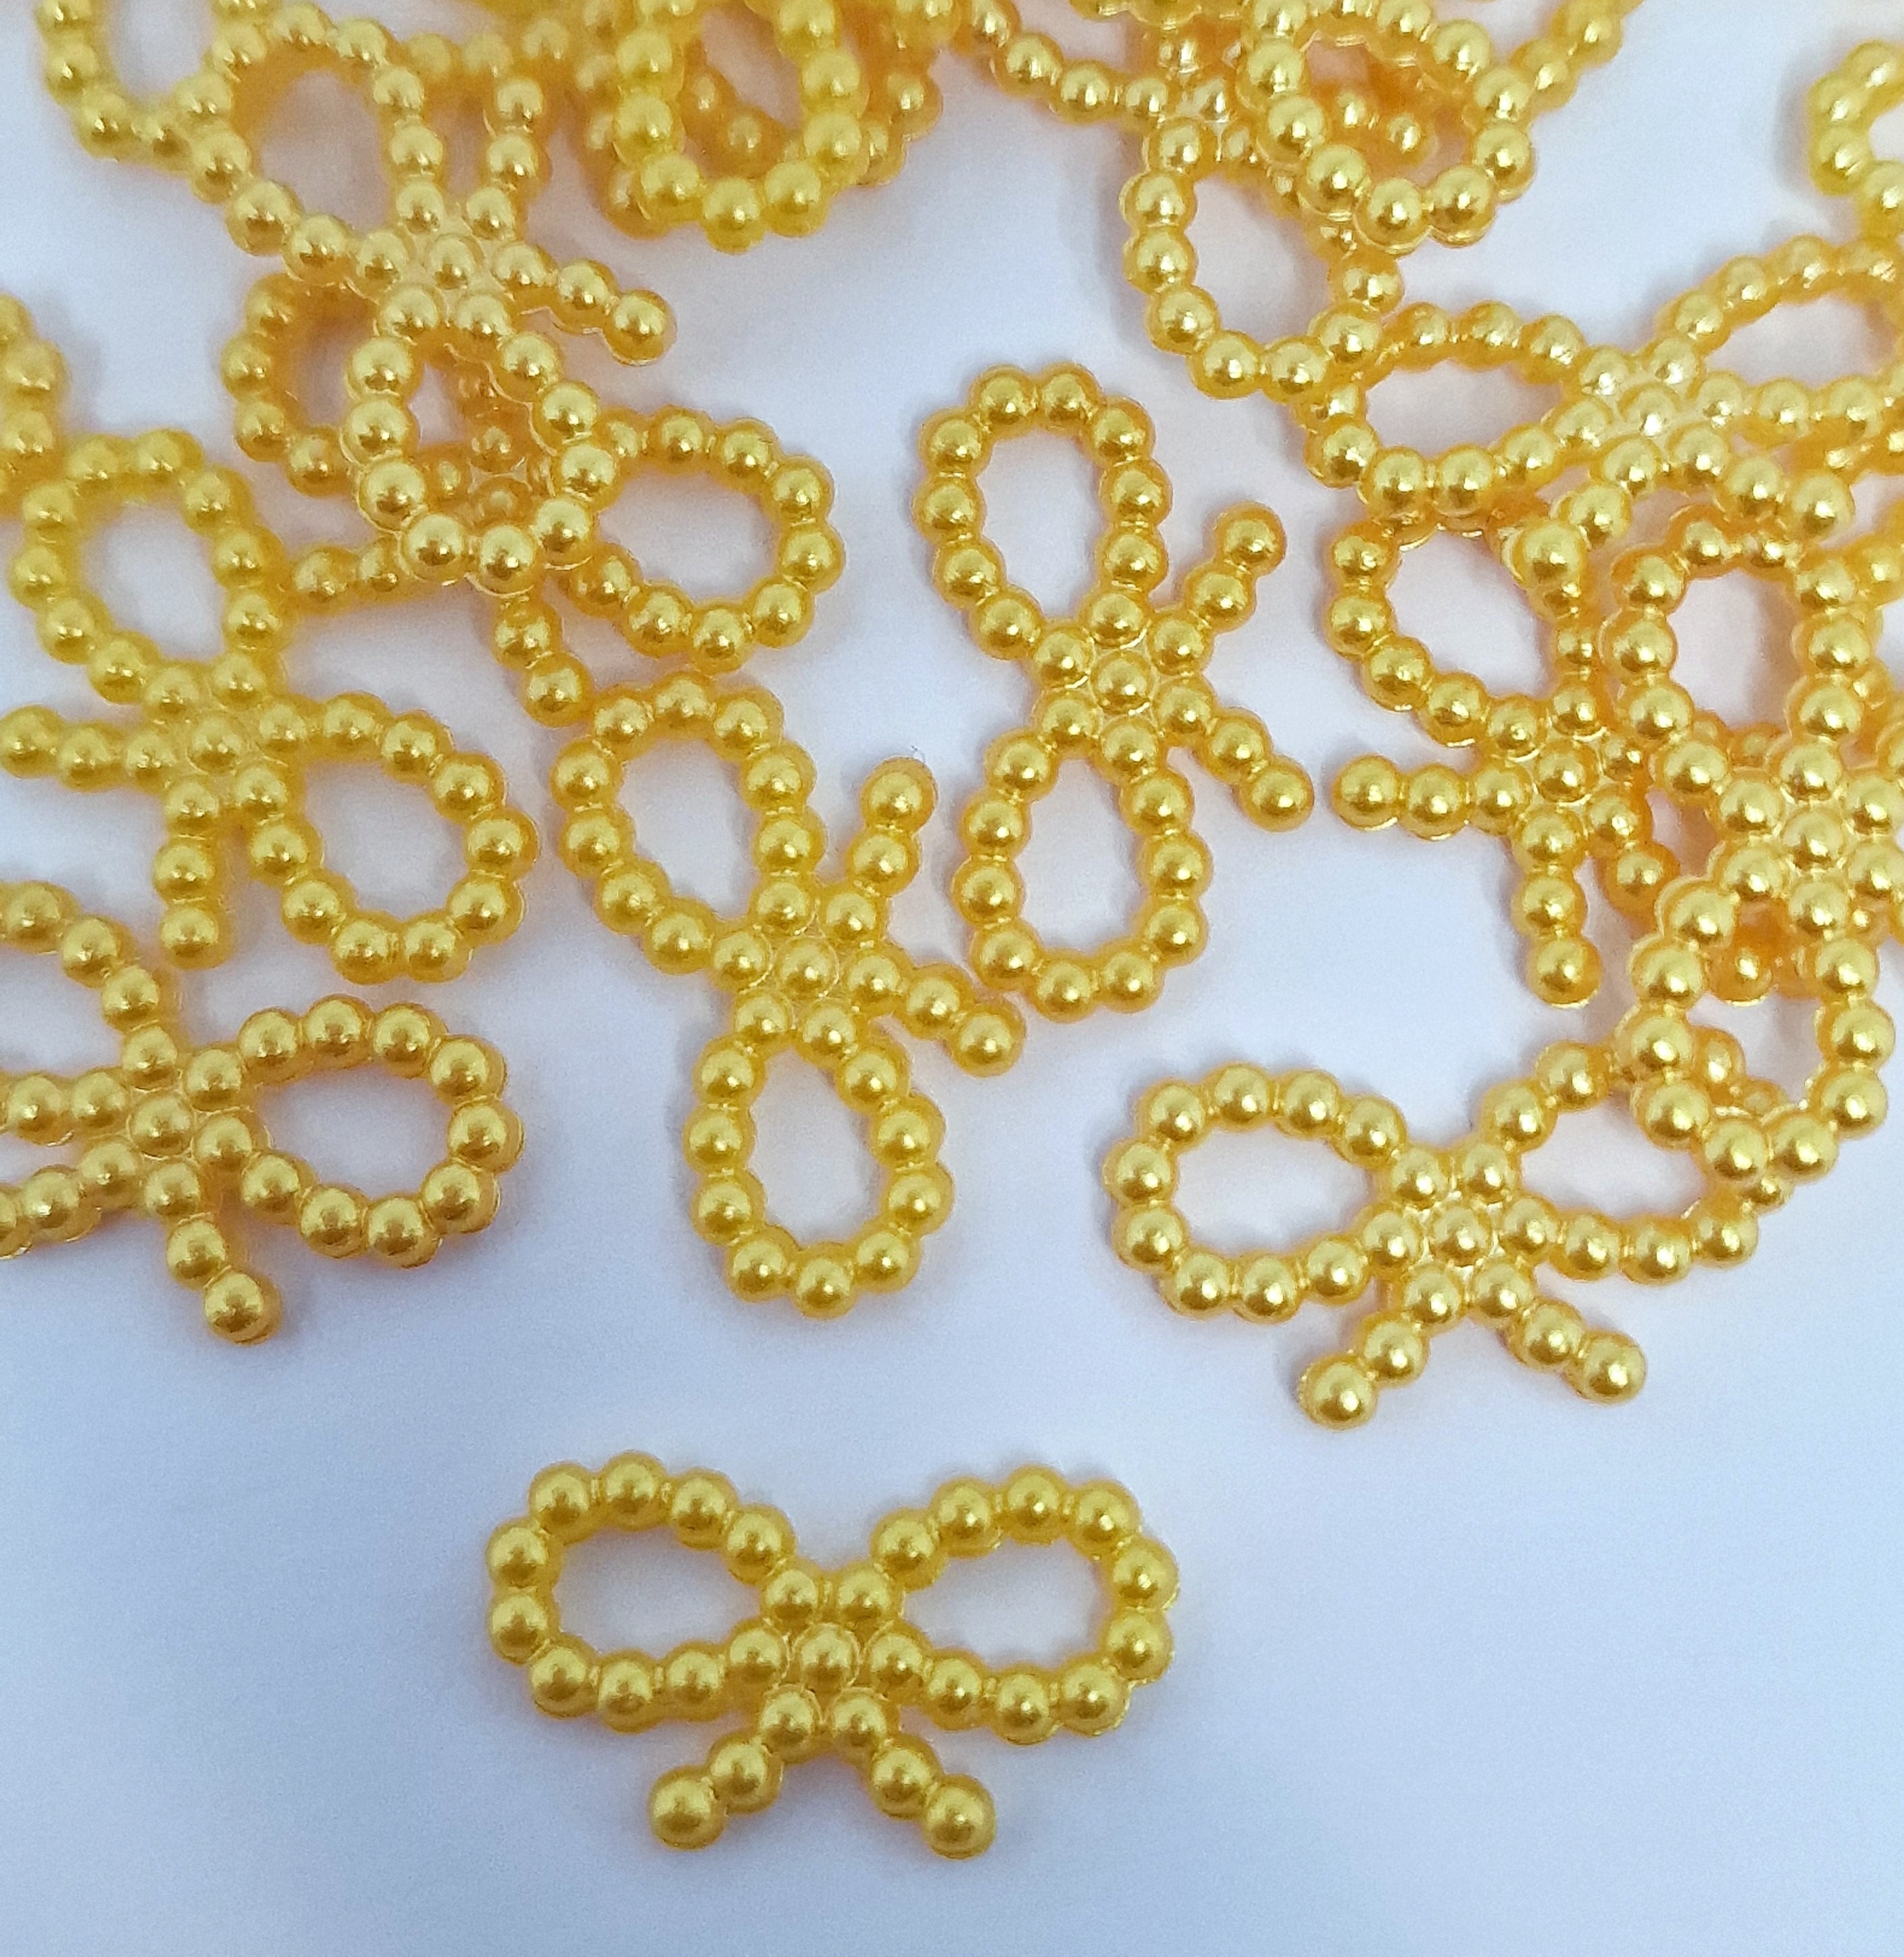 MajorCrafts 150pcs 18mm x 10mm Orange Gold Hollow Bowknot Butterfly Resin Pearls